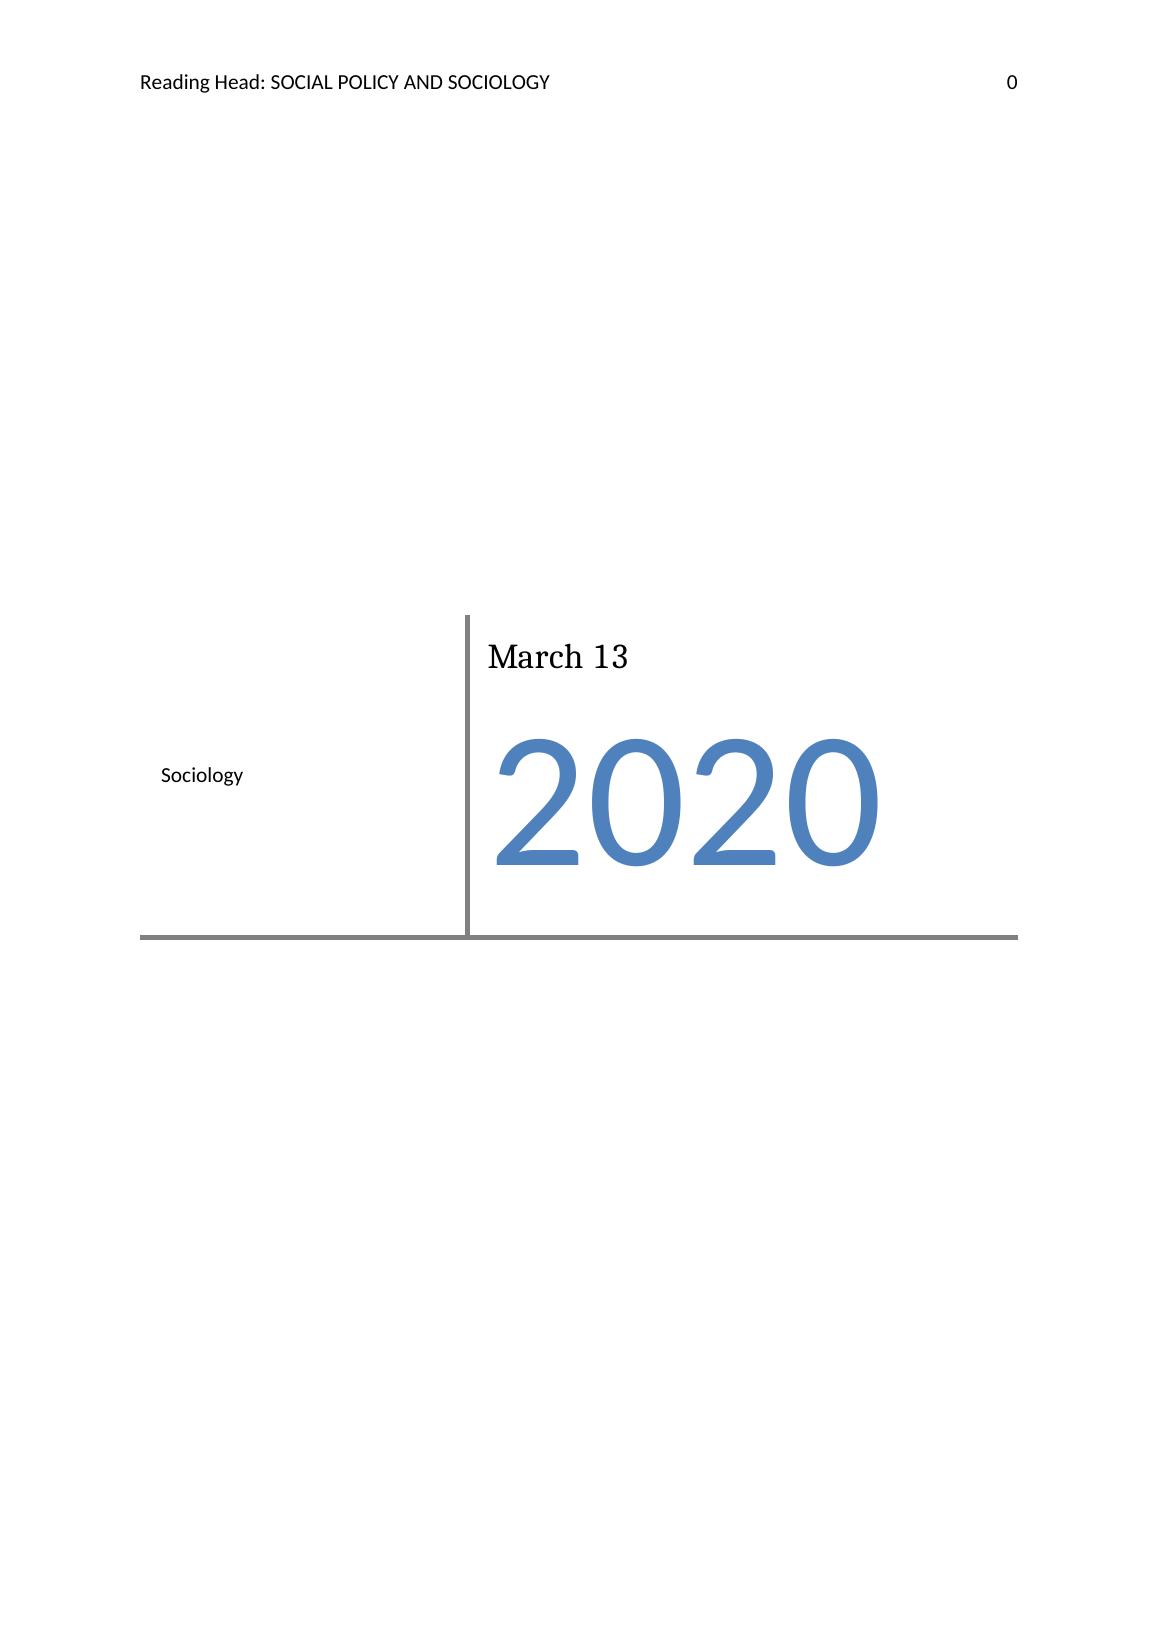 Introduction to the Social Policy of March 13 2020_1